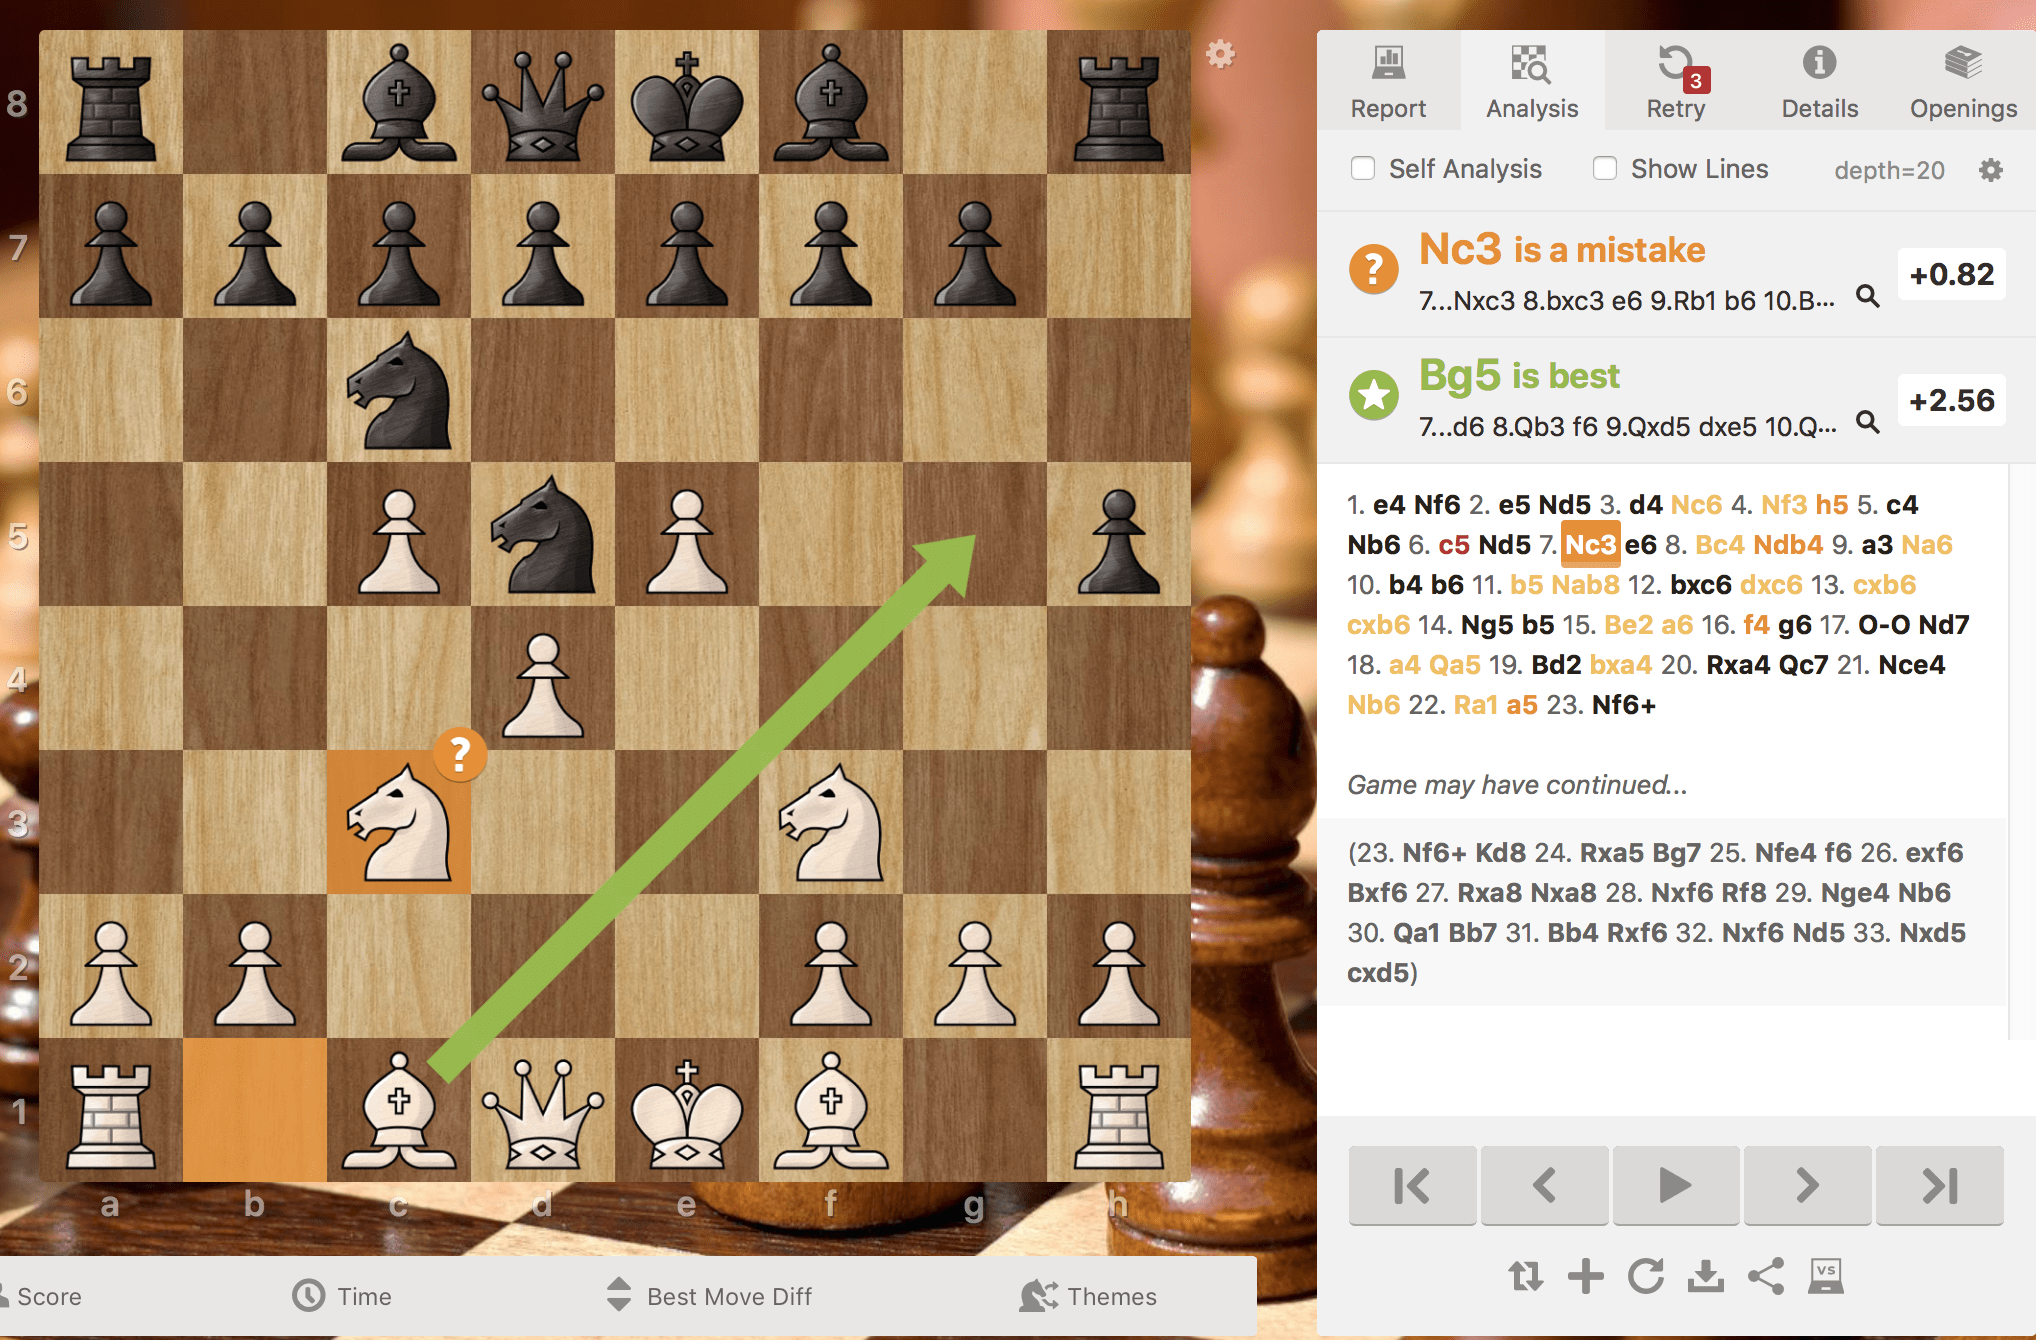 Lichess analysis computer considers my f4 move as inaccuracy